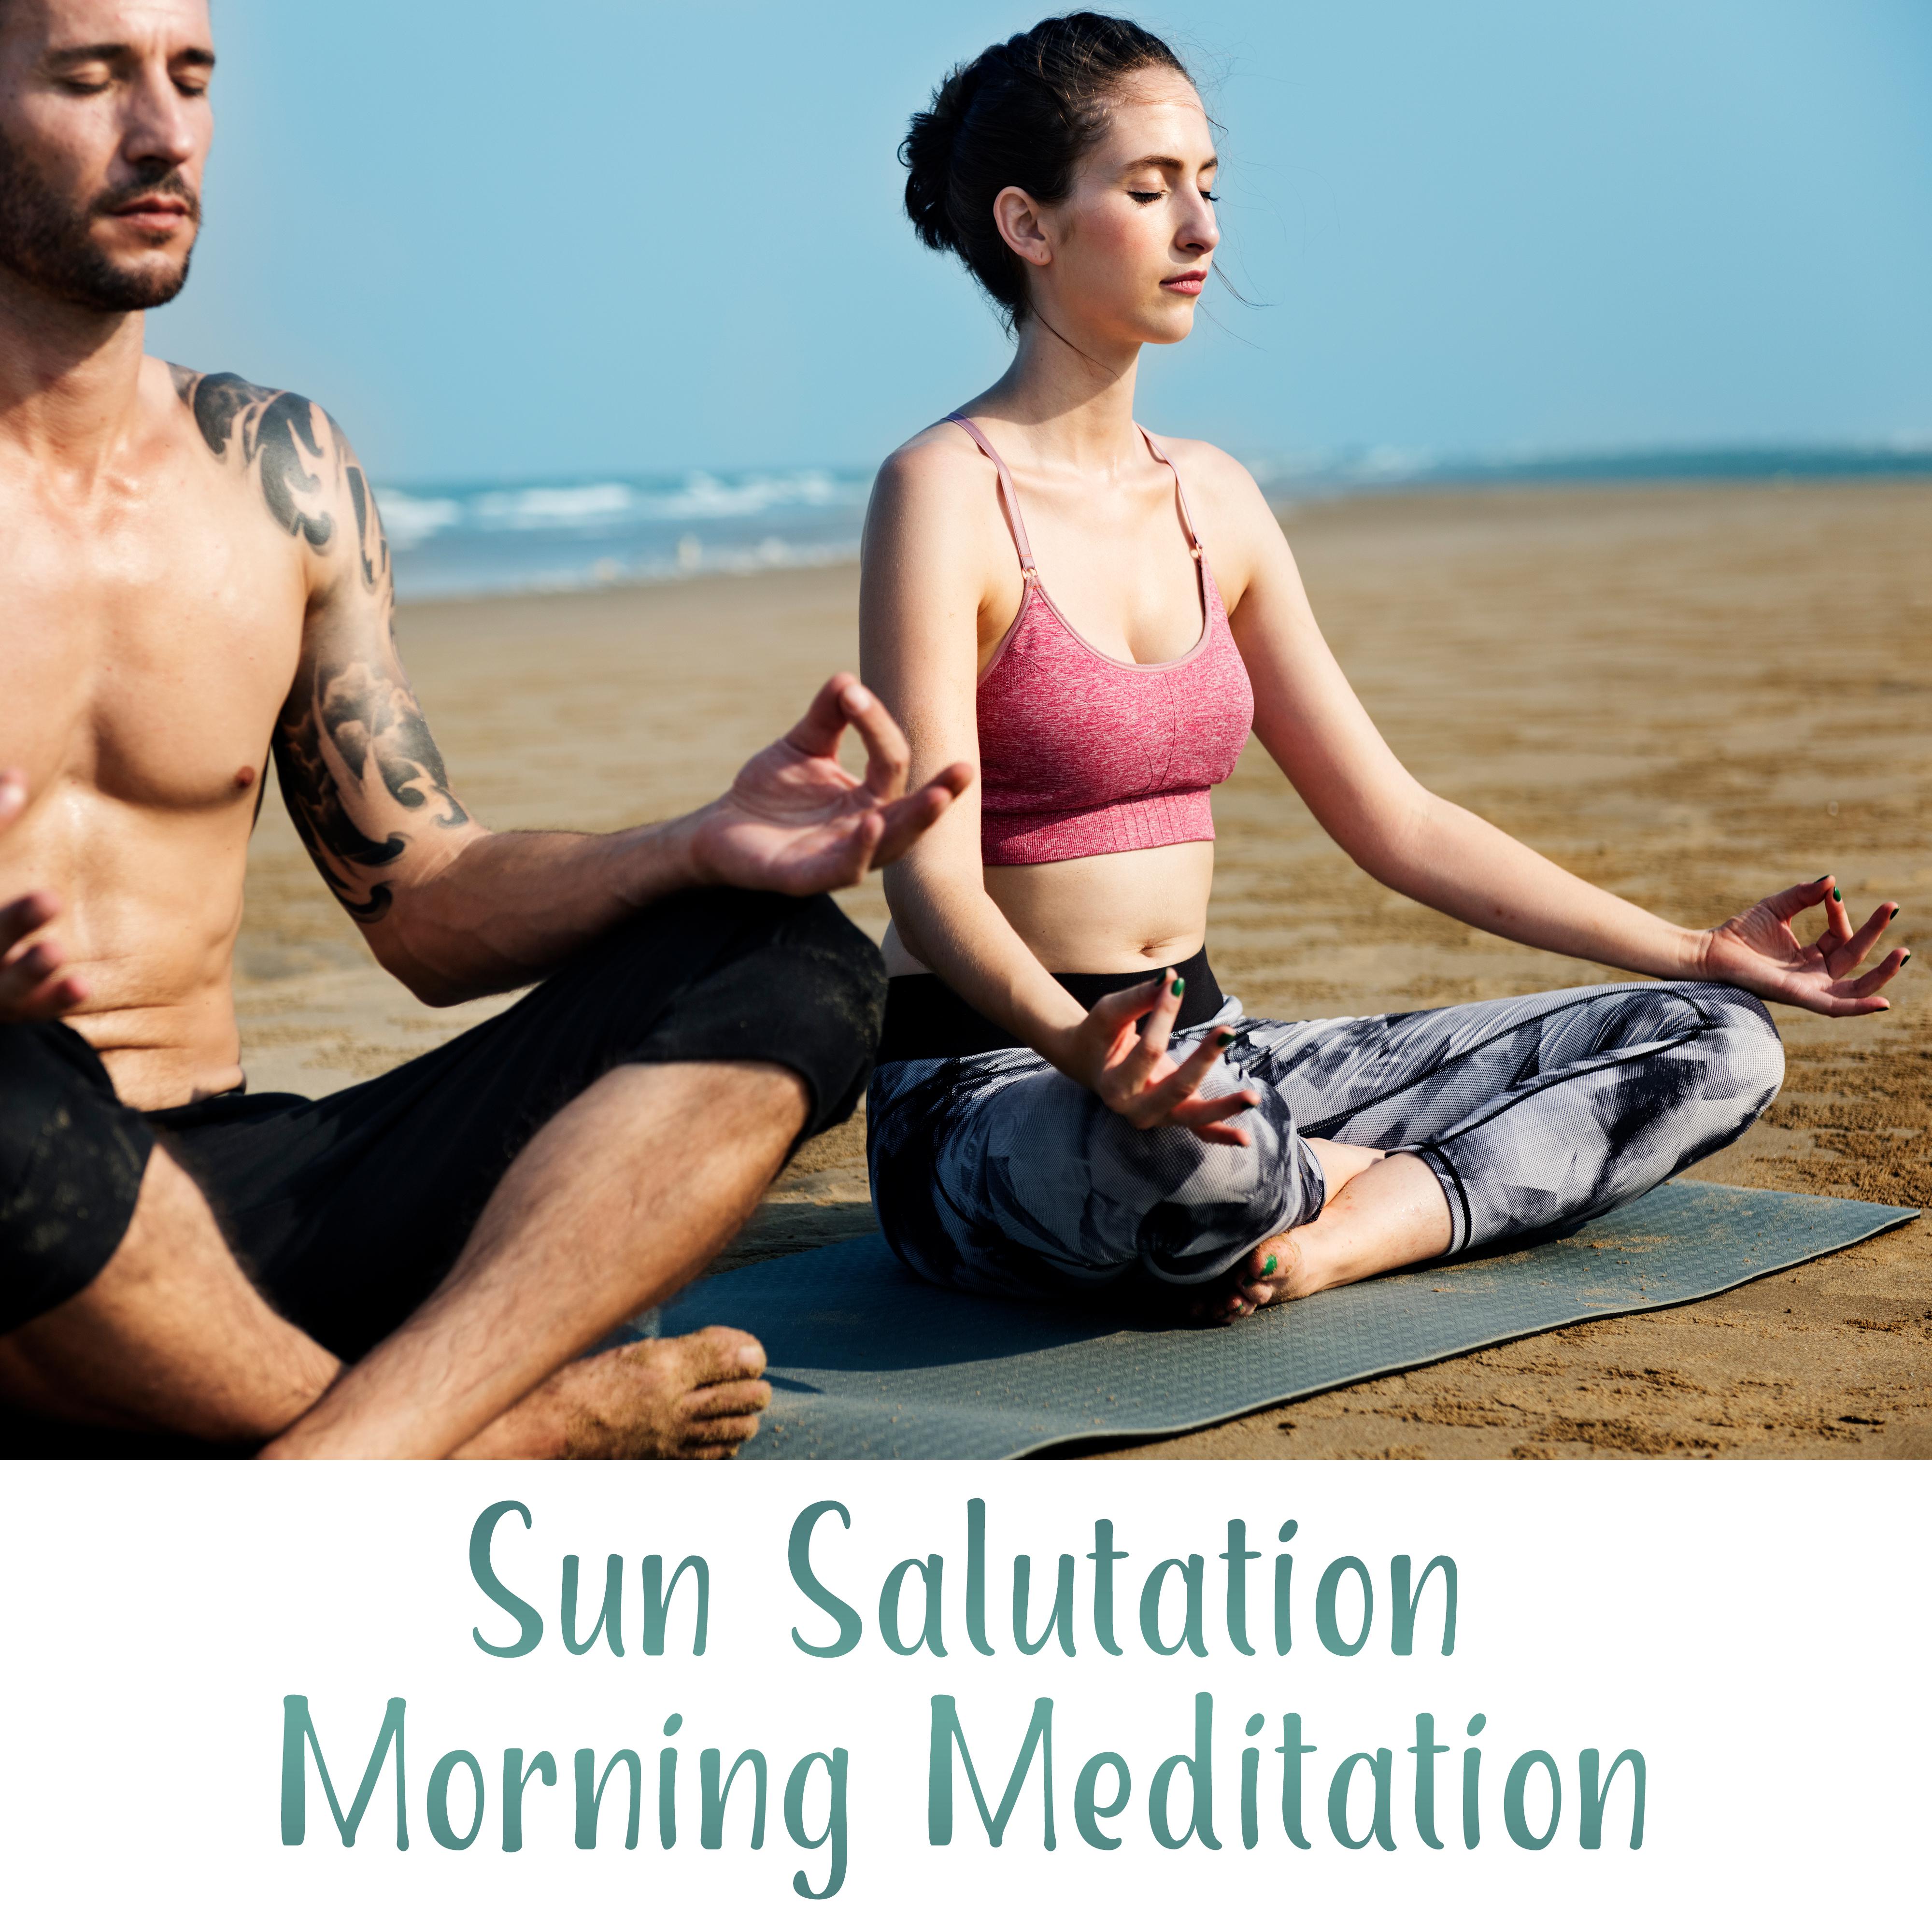 Sun Salutation Morning Meditation: 2019 New Age Ambient Music for Start a Day with Yoga Training